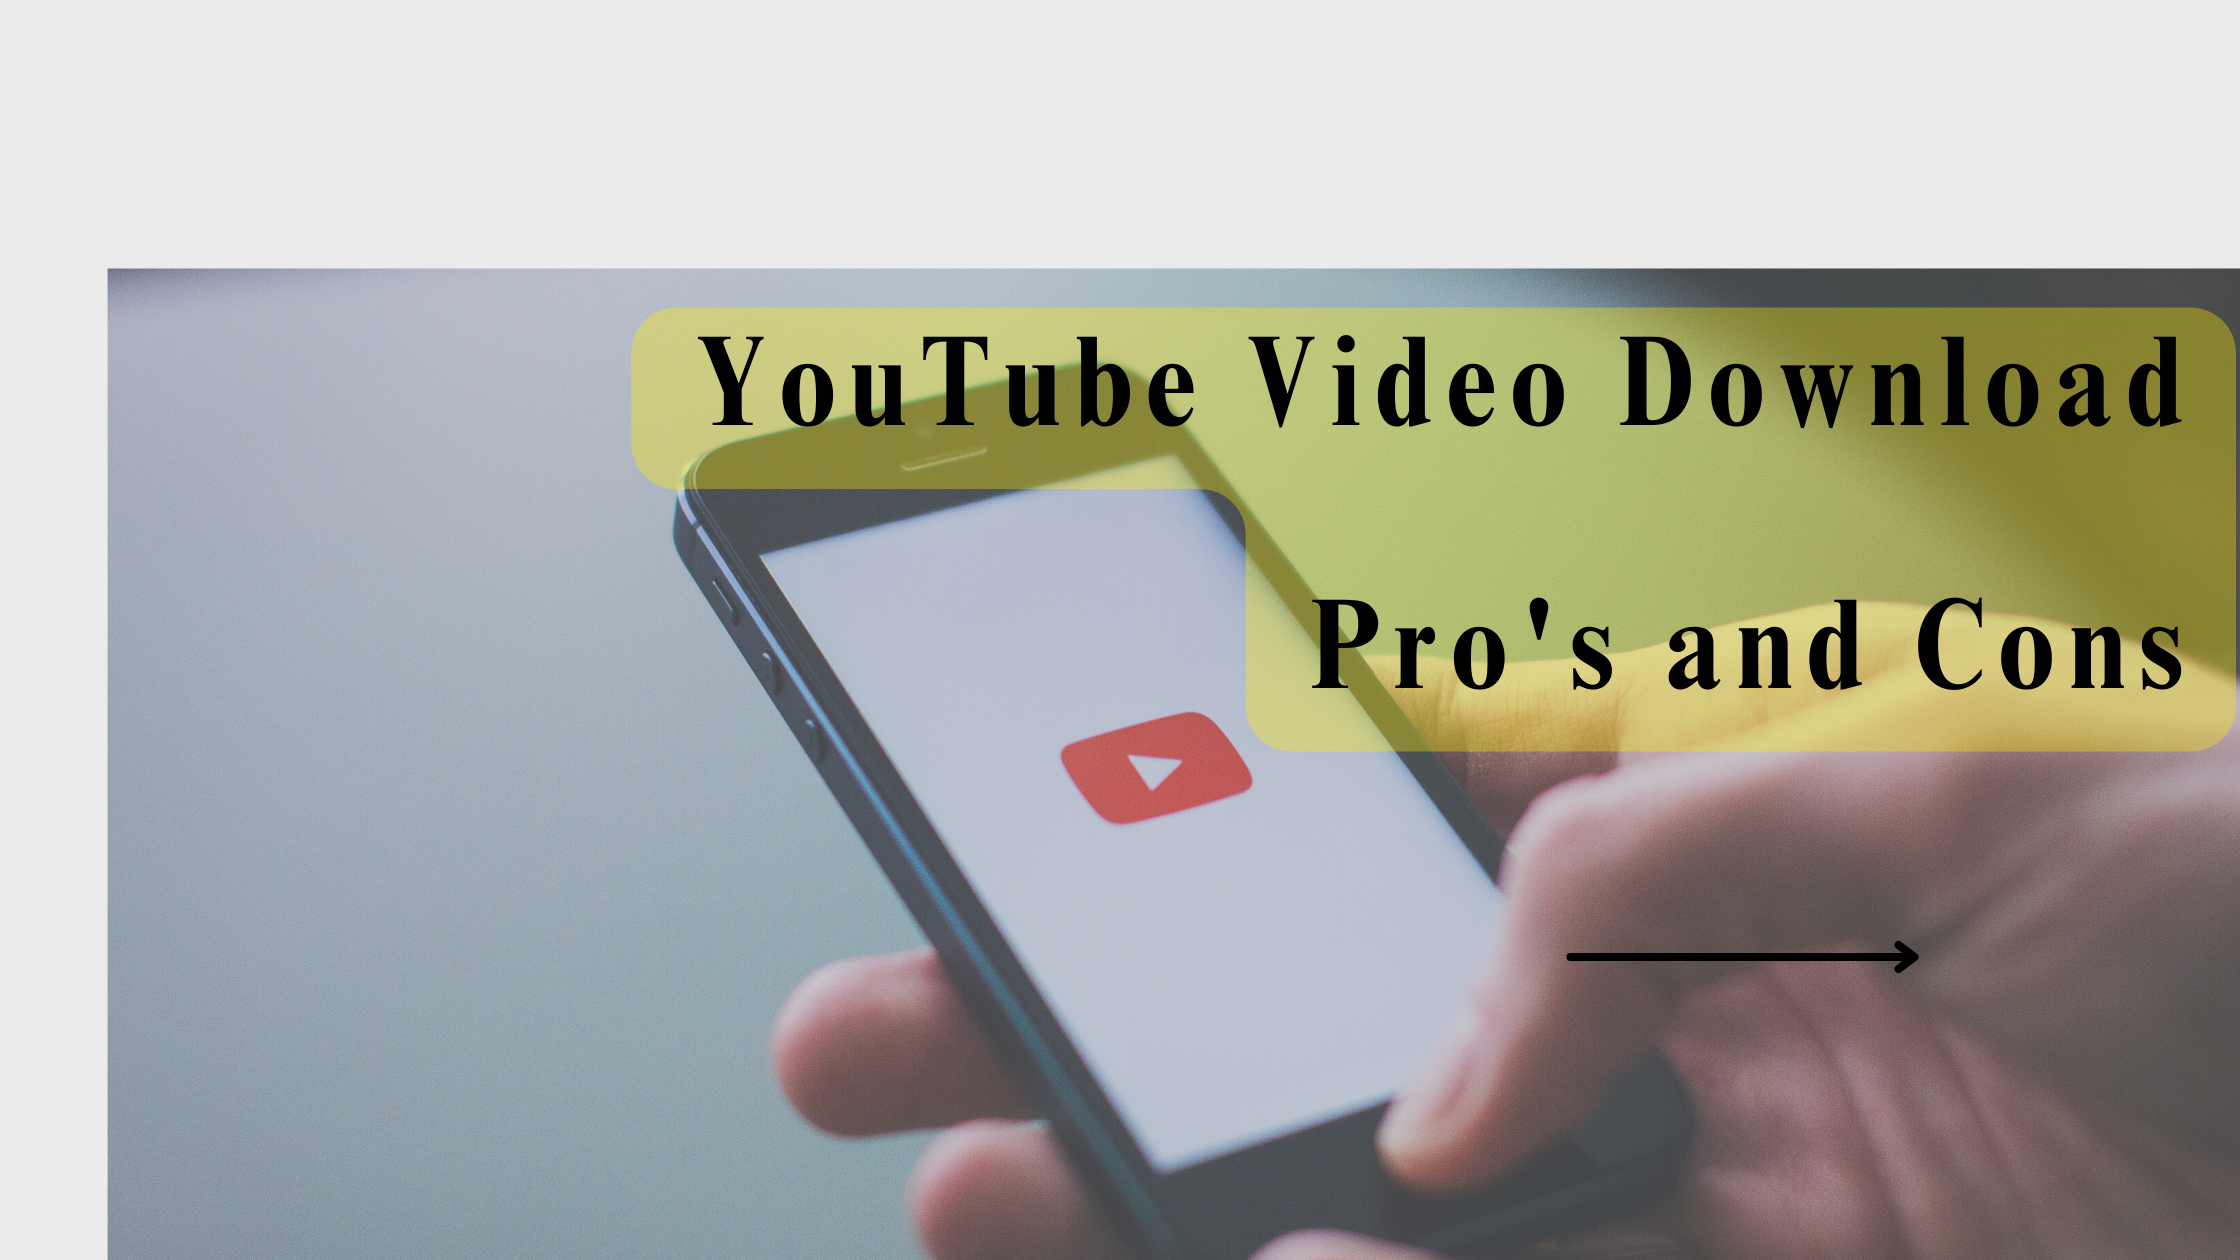 YouTube Video Download vs. Streaming: Pros and Cons